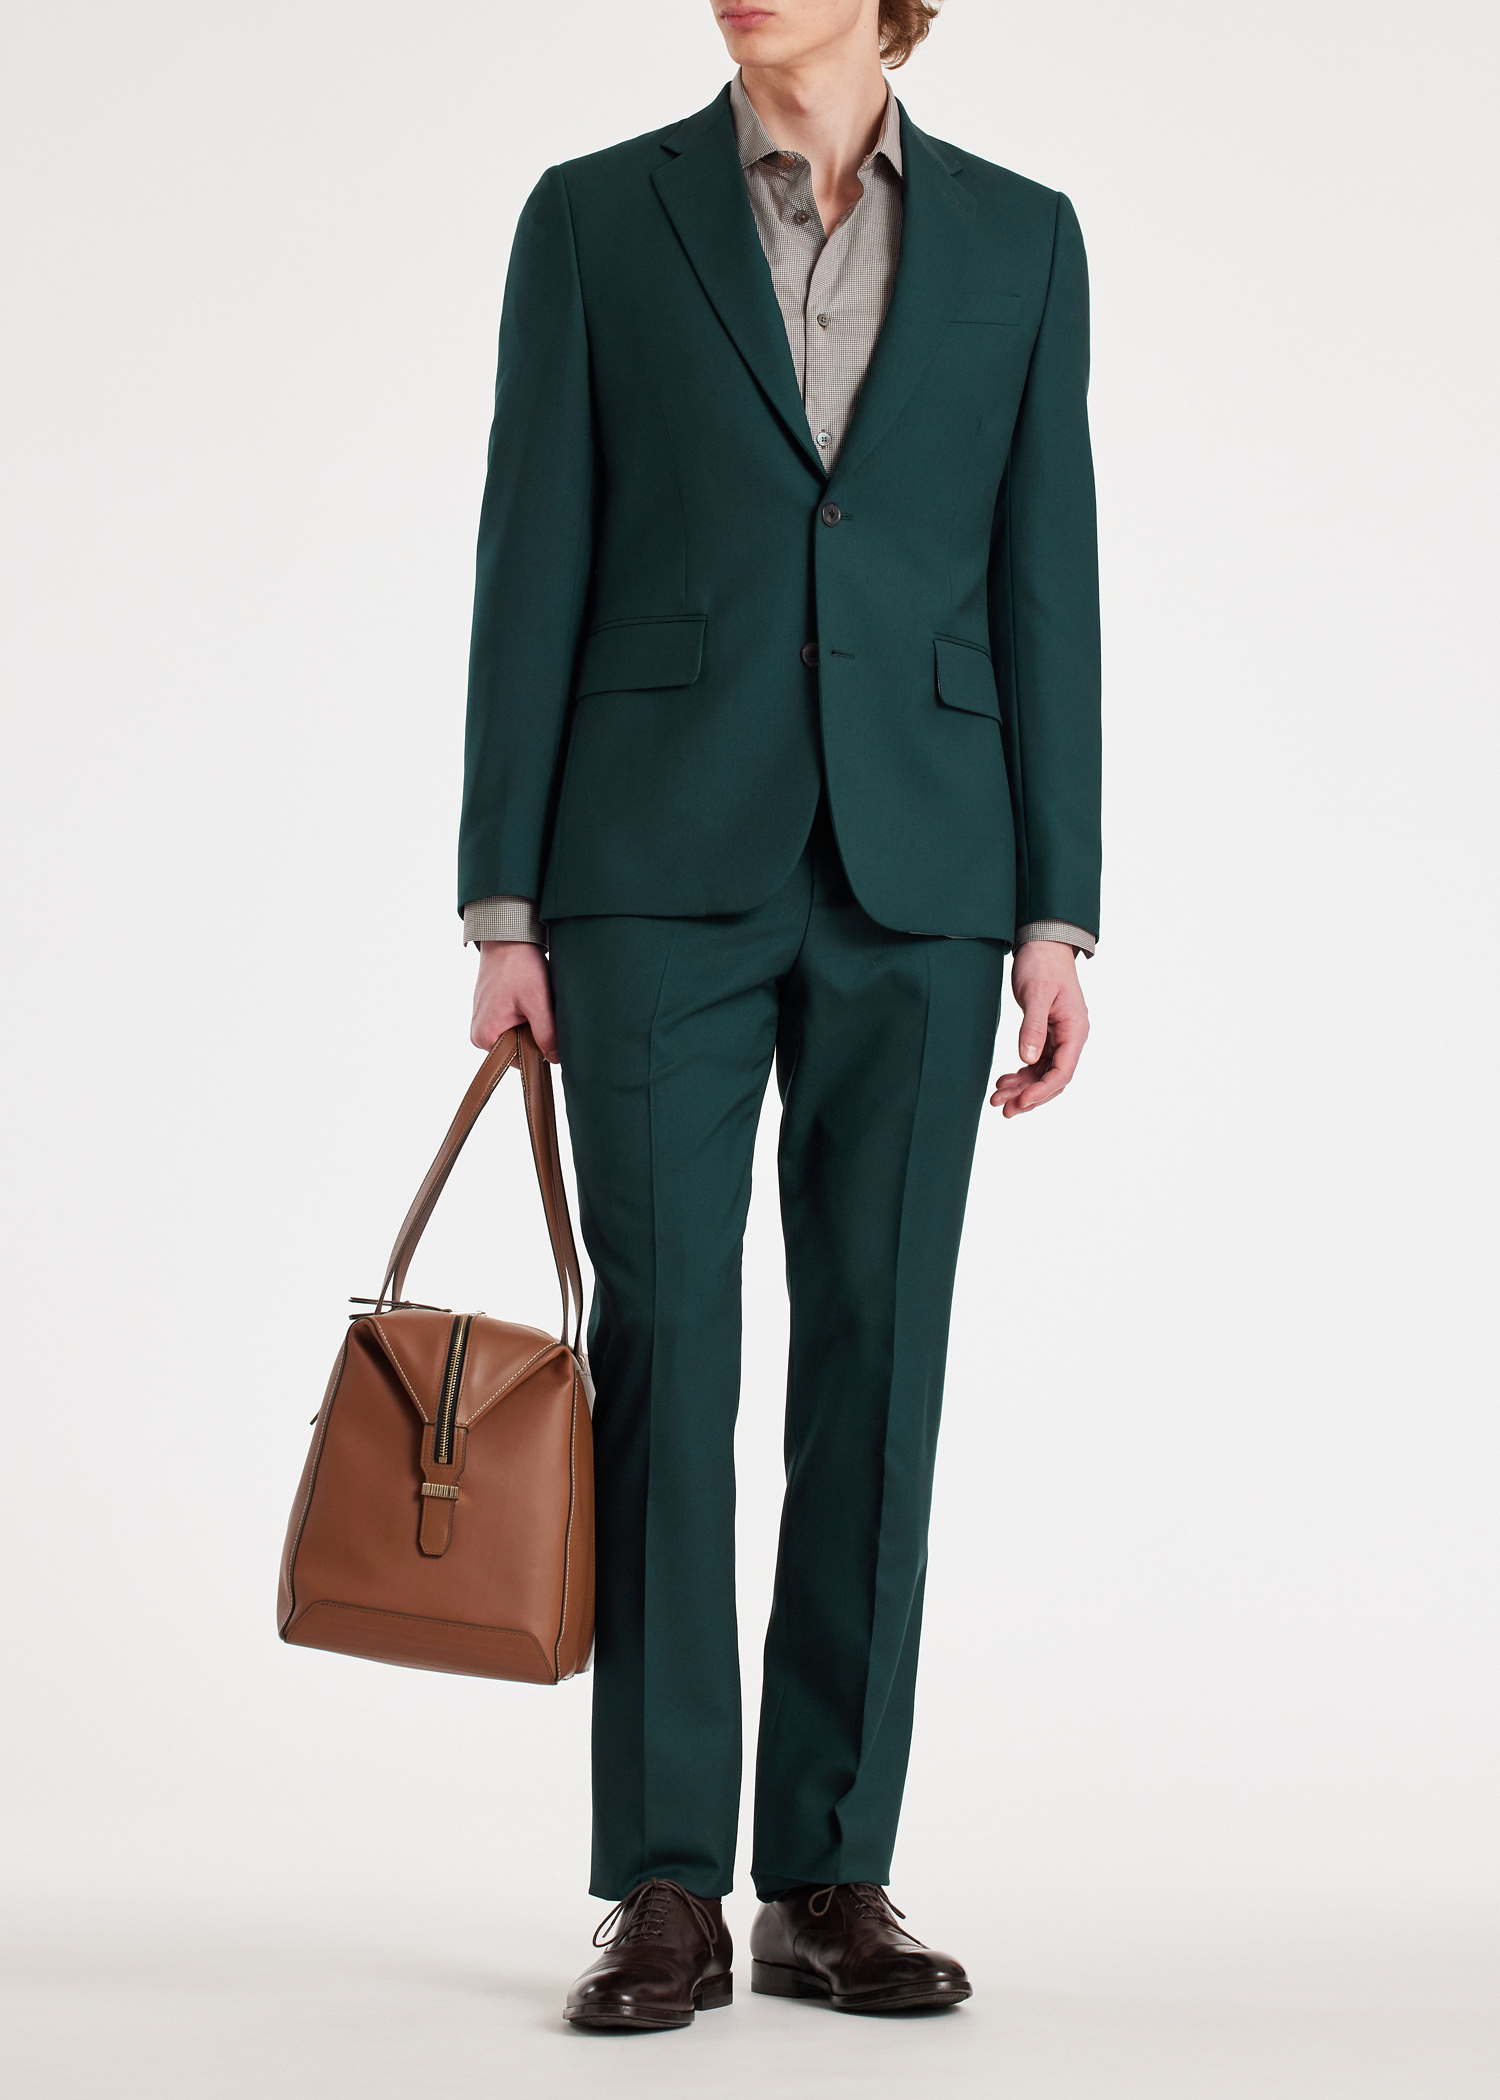 New Arrivals | Paul Smith